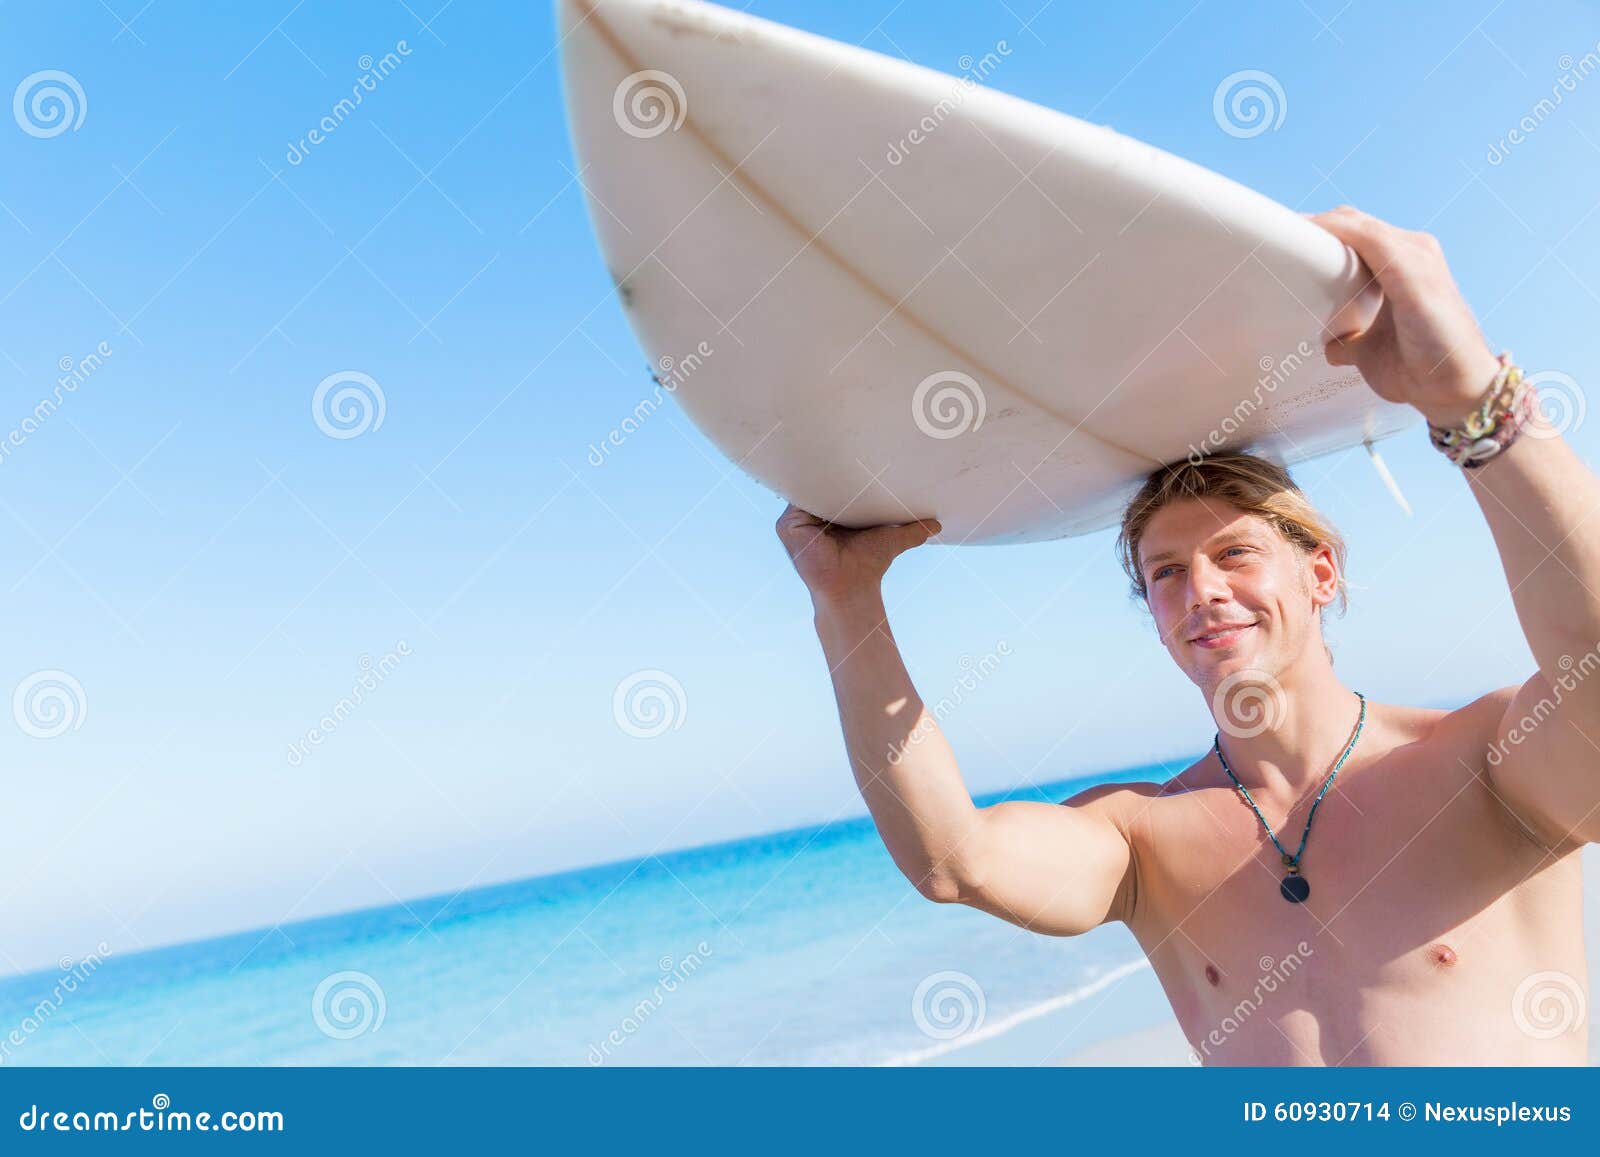 Ready to hit waves stock photo. Image of summer, holiday - 60930714